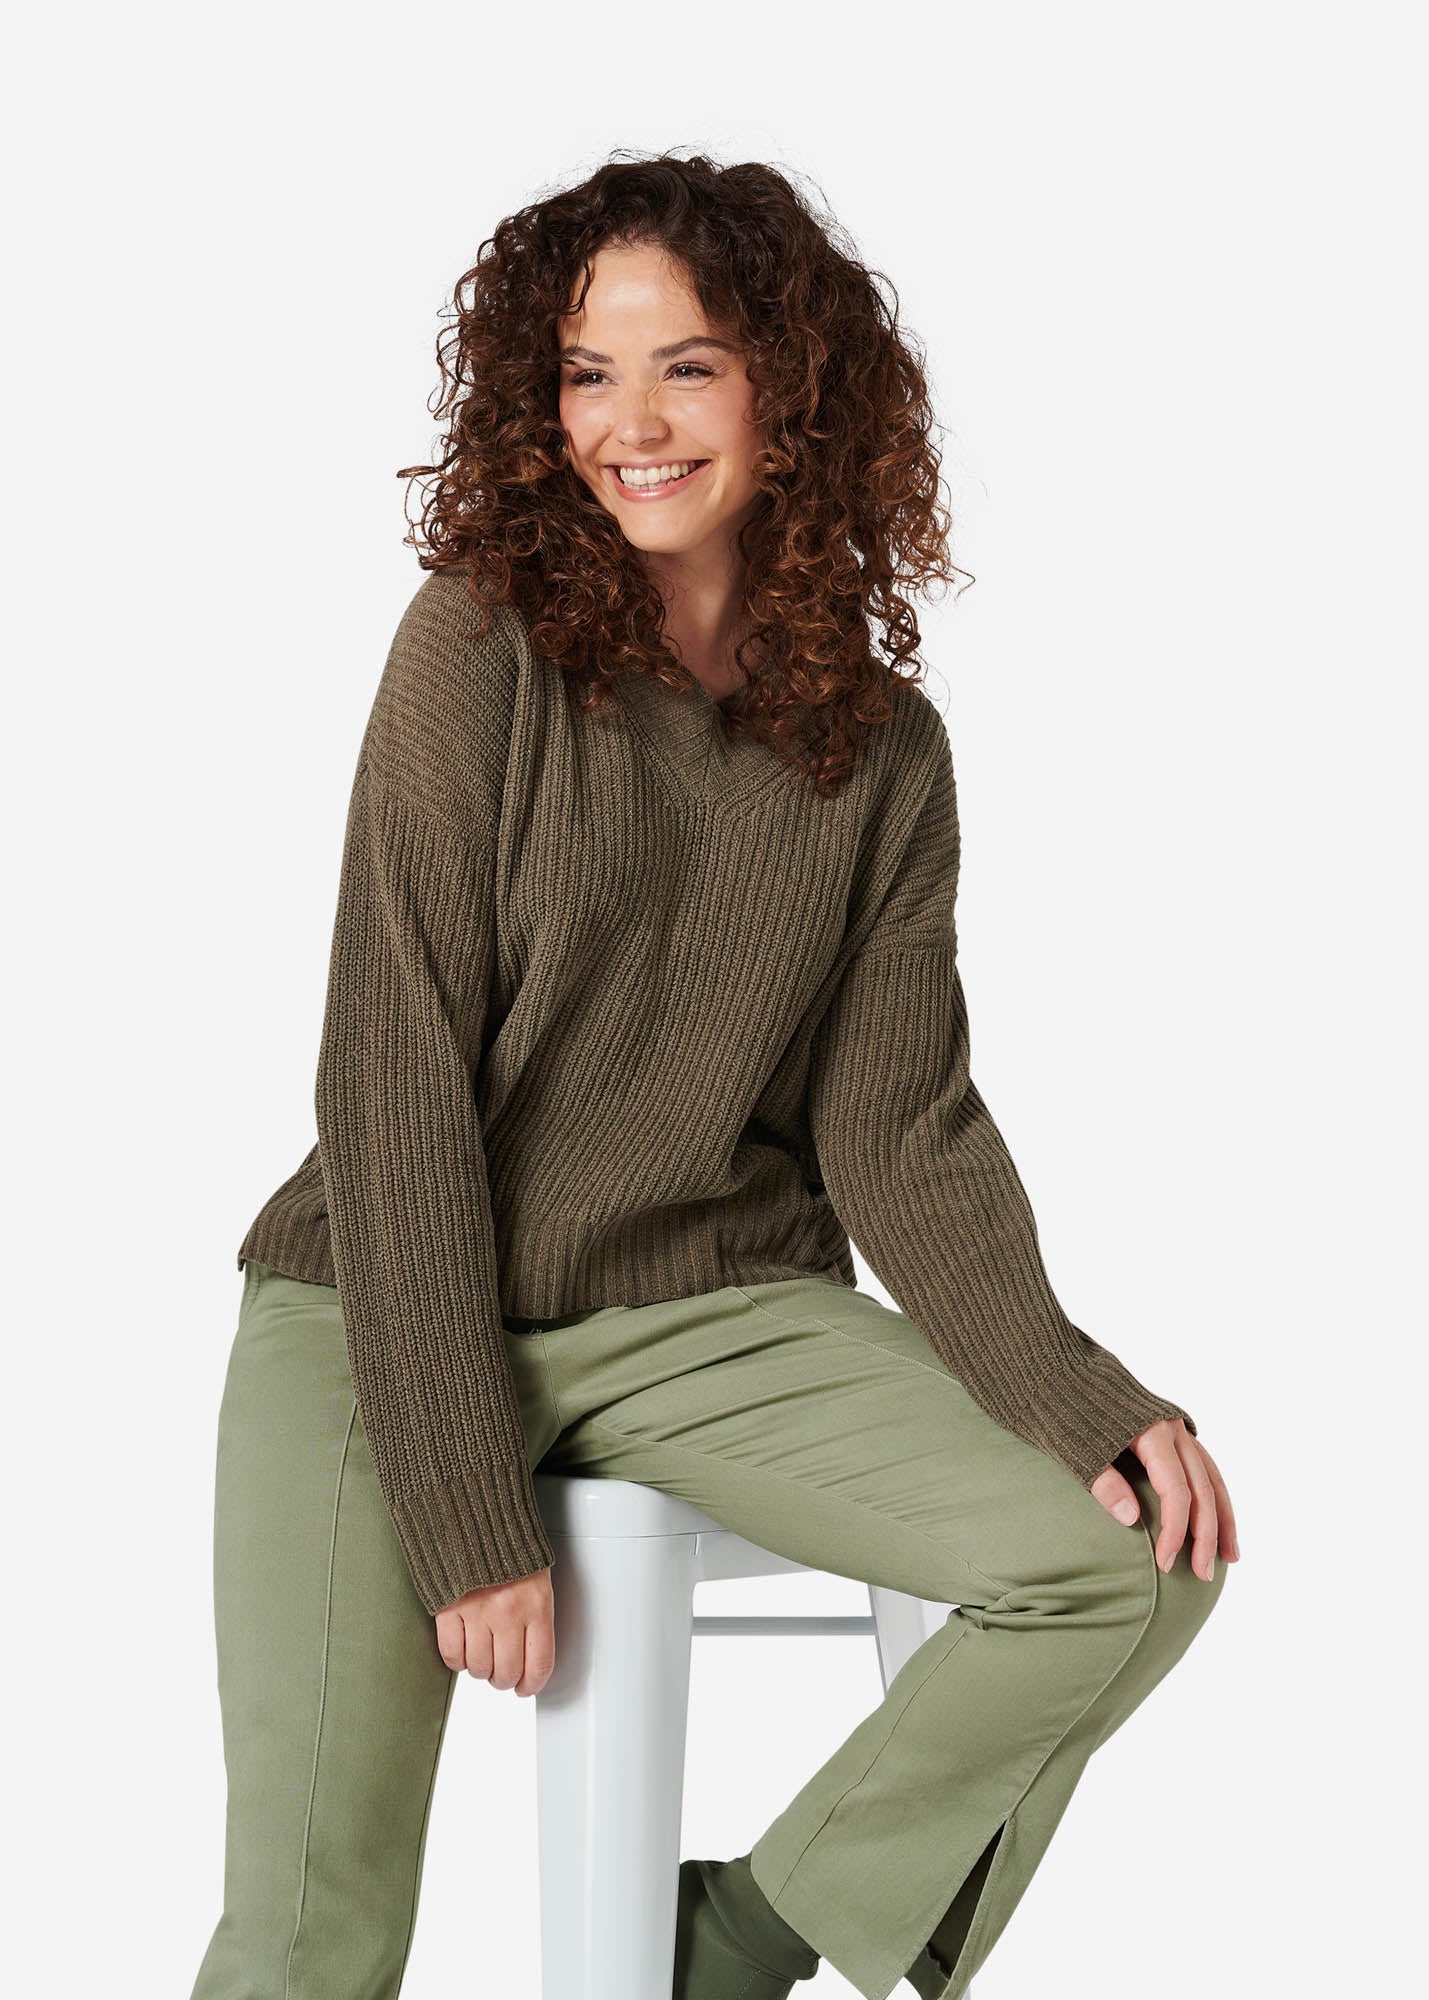 Pullover Modell "Amelie"